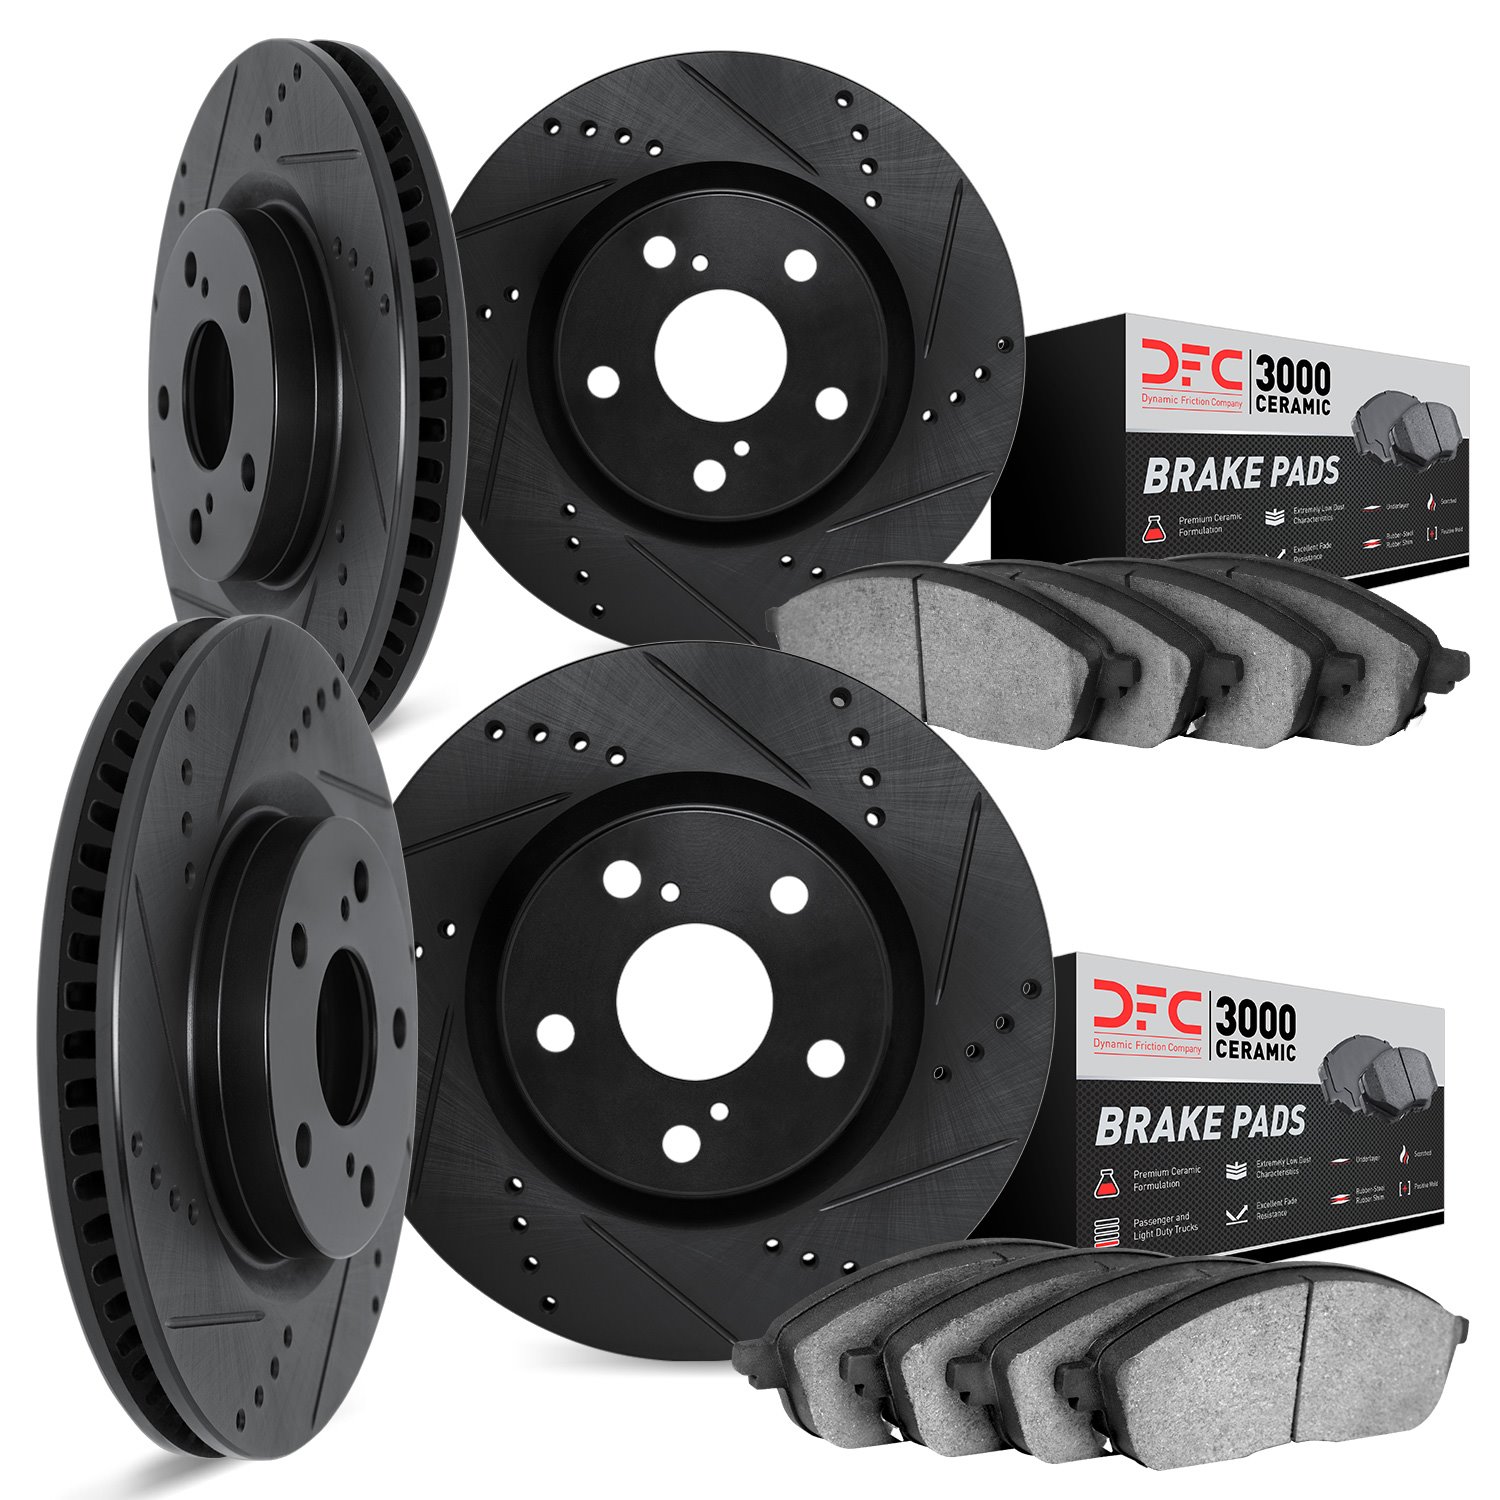 8304-02002 Drilled/Slotted Brake Rotors with 3000-Series Ceramic Brake Pads Kit [Black], 1977-1988 Porsche, Position: Front and